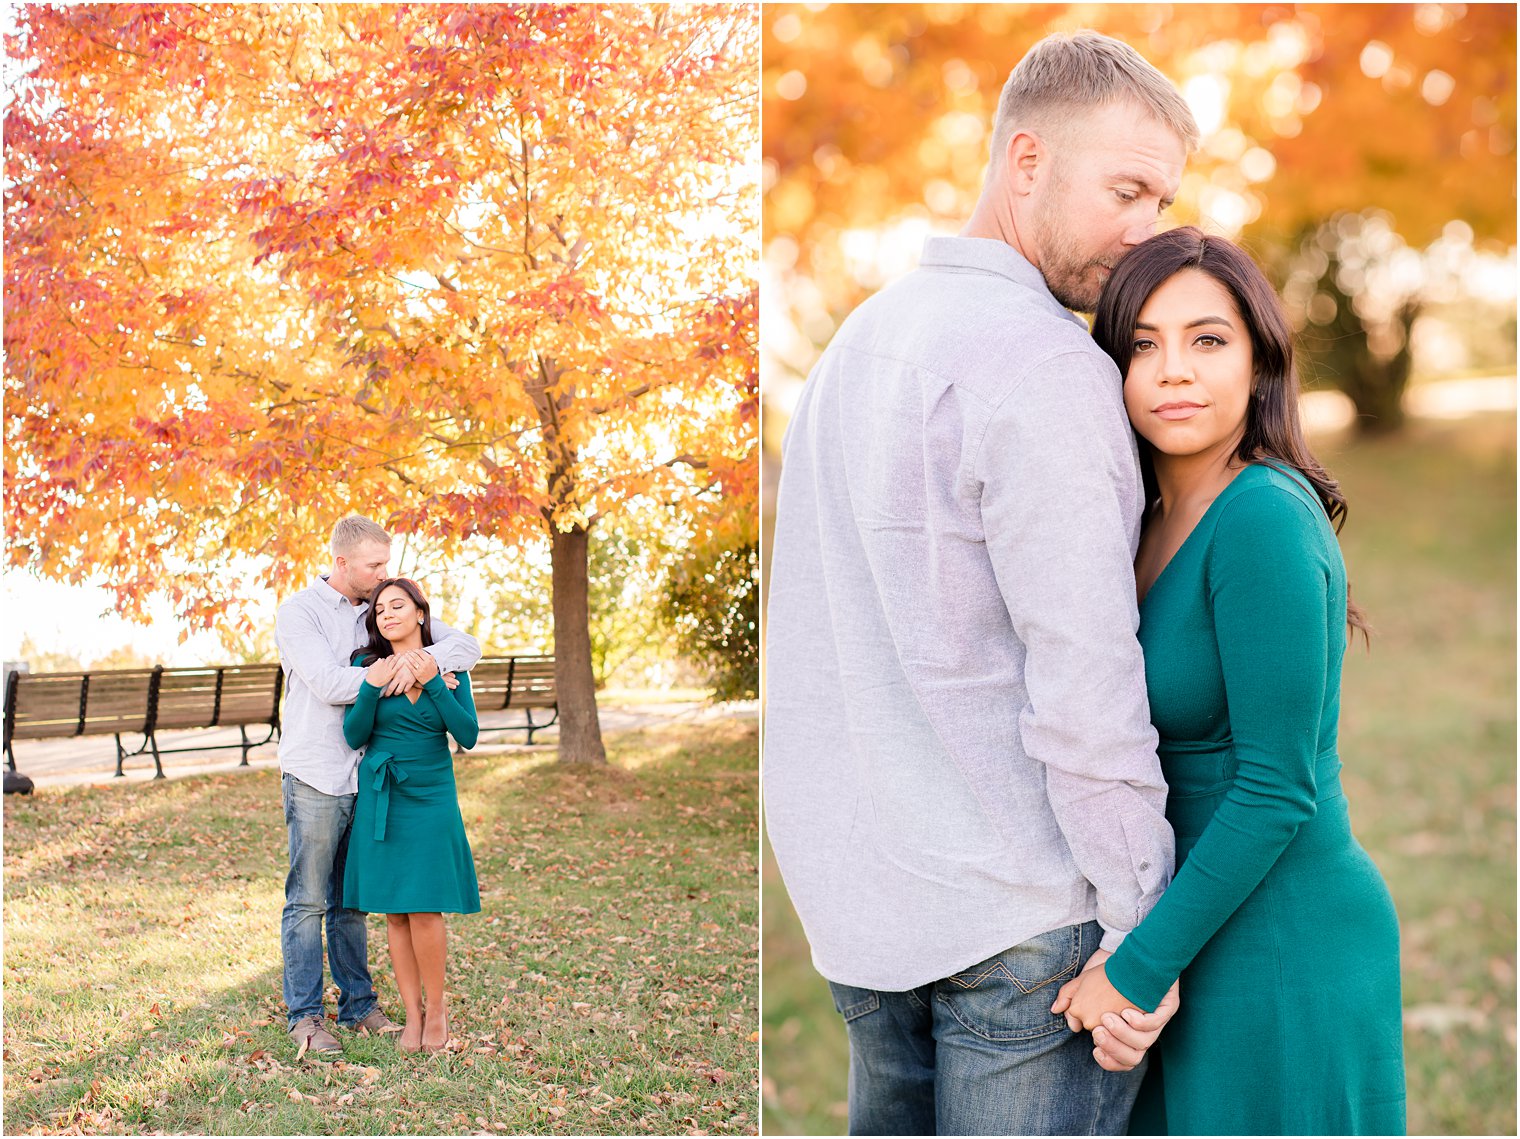 Classic and timeless autumn engagement photos at Liberty State Park by NJ Wedding Photographers Idalia Photography